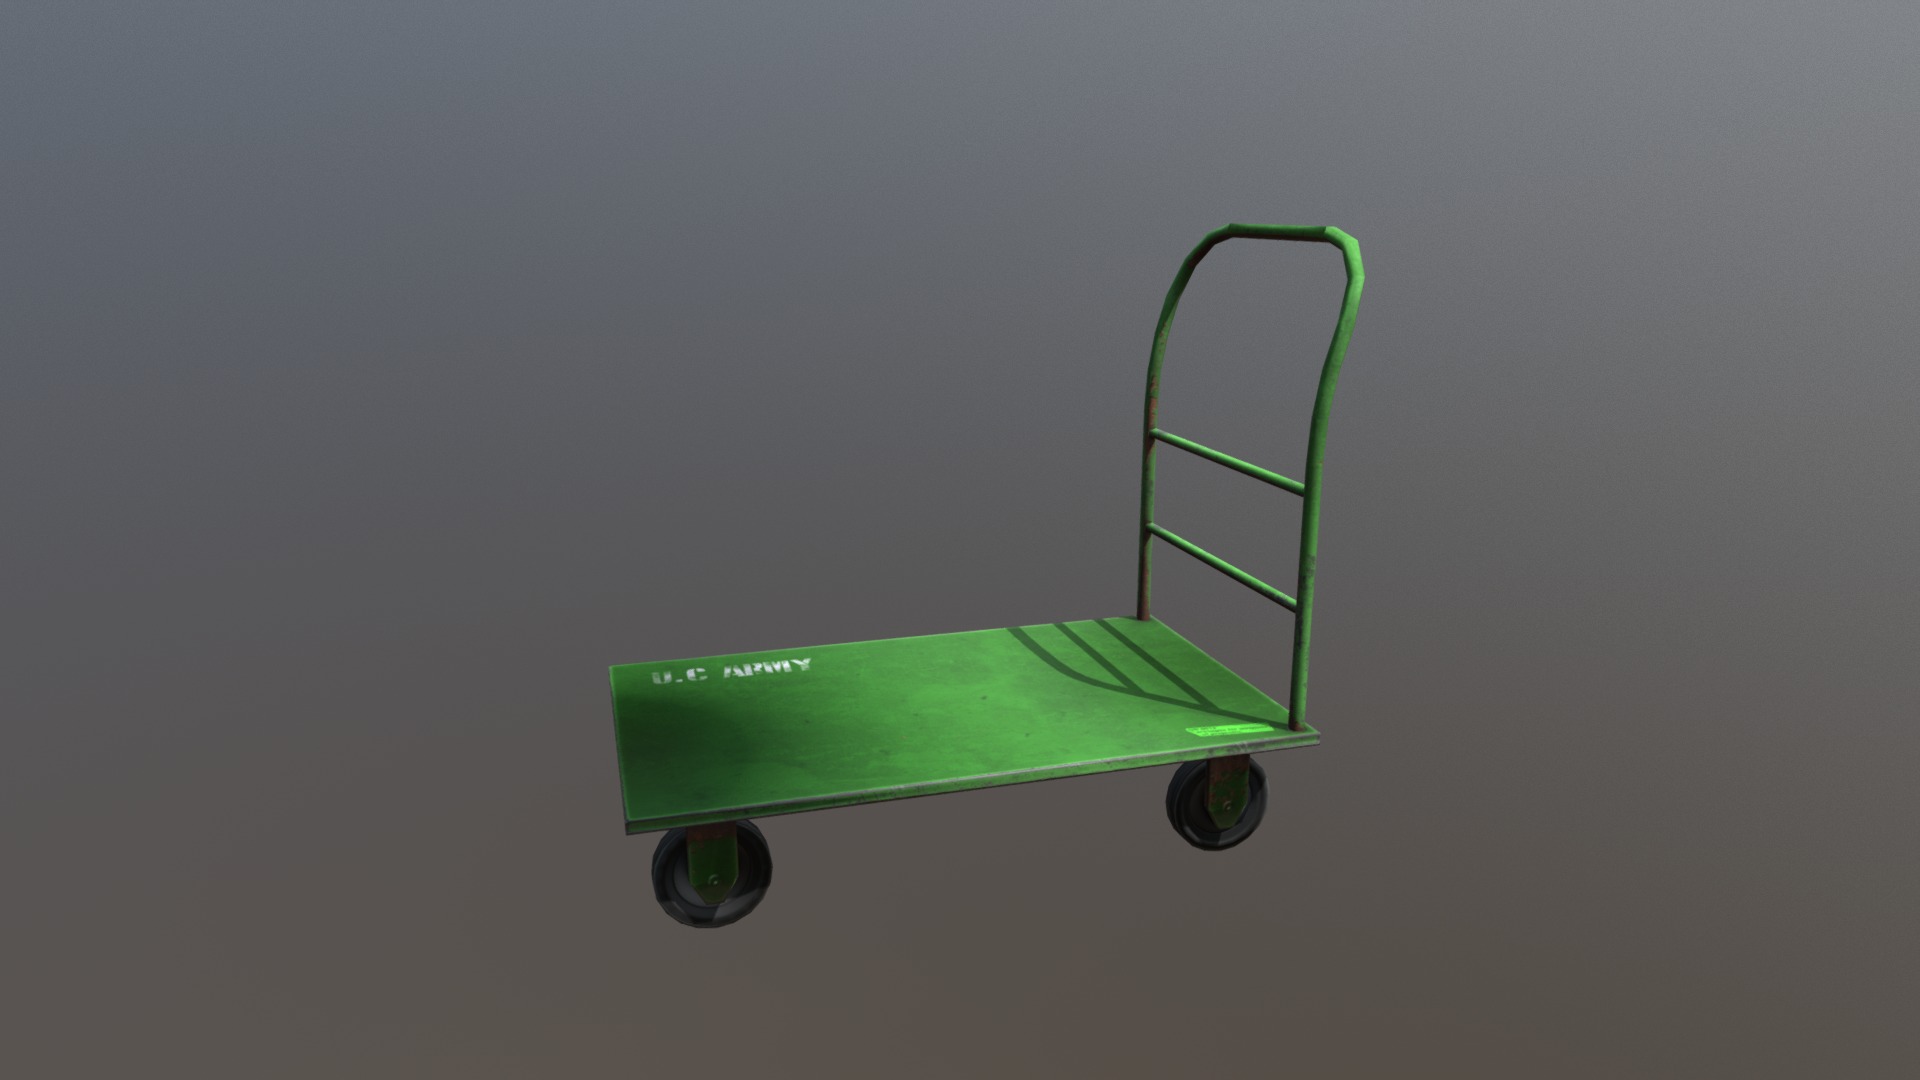 3D model Handling cart - This is a 3D model of the Handling cart. The 3D model is about a green shopping cart.